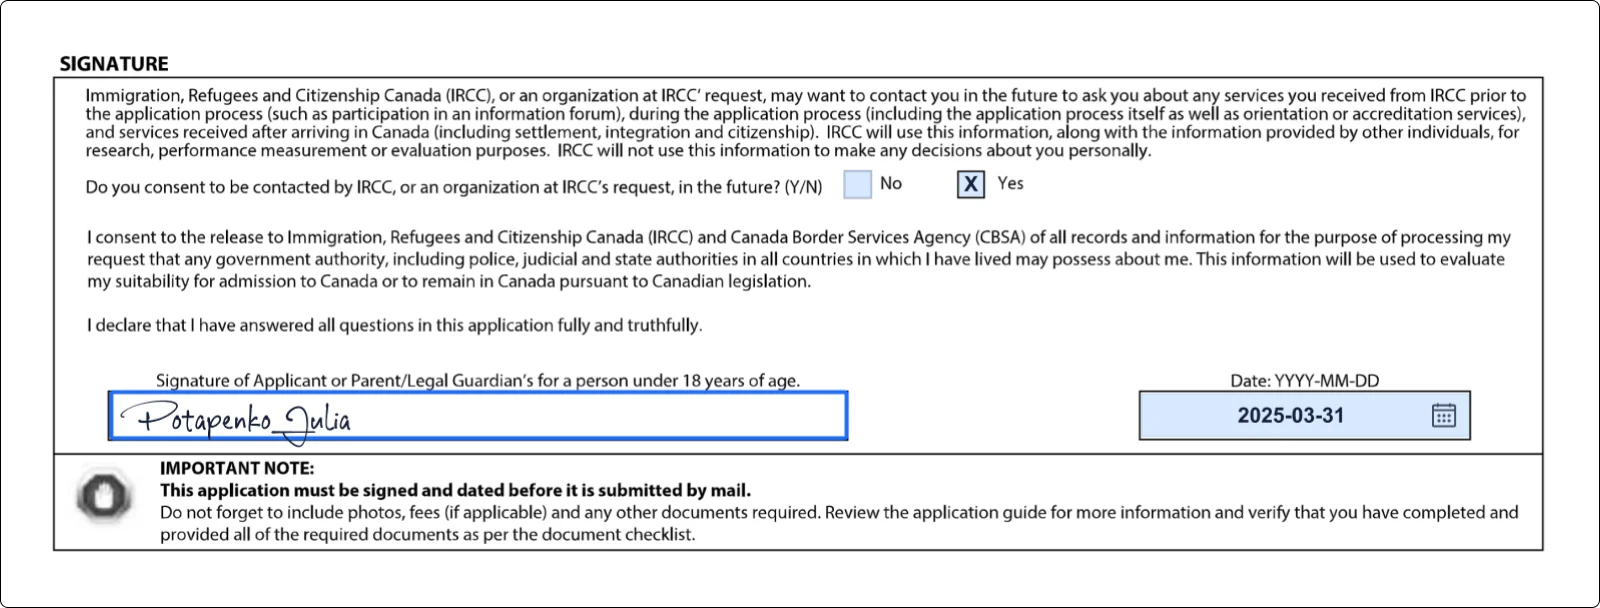 Signing imm 5710 form example